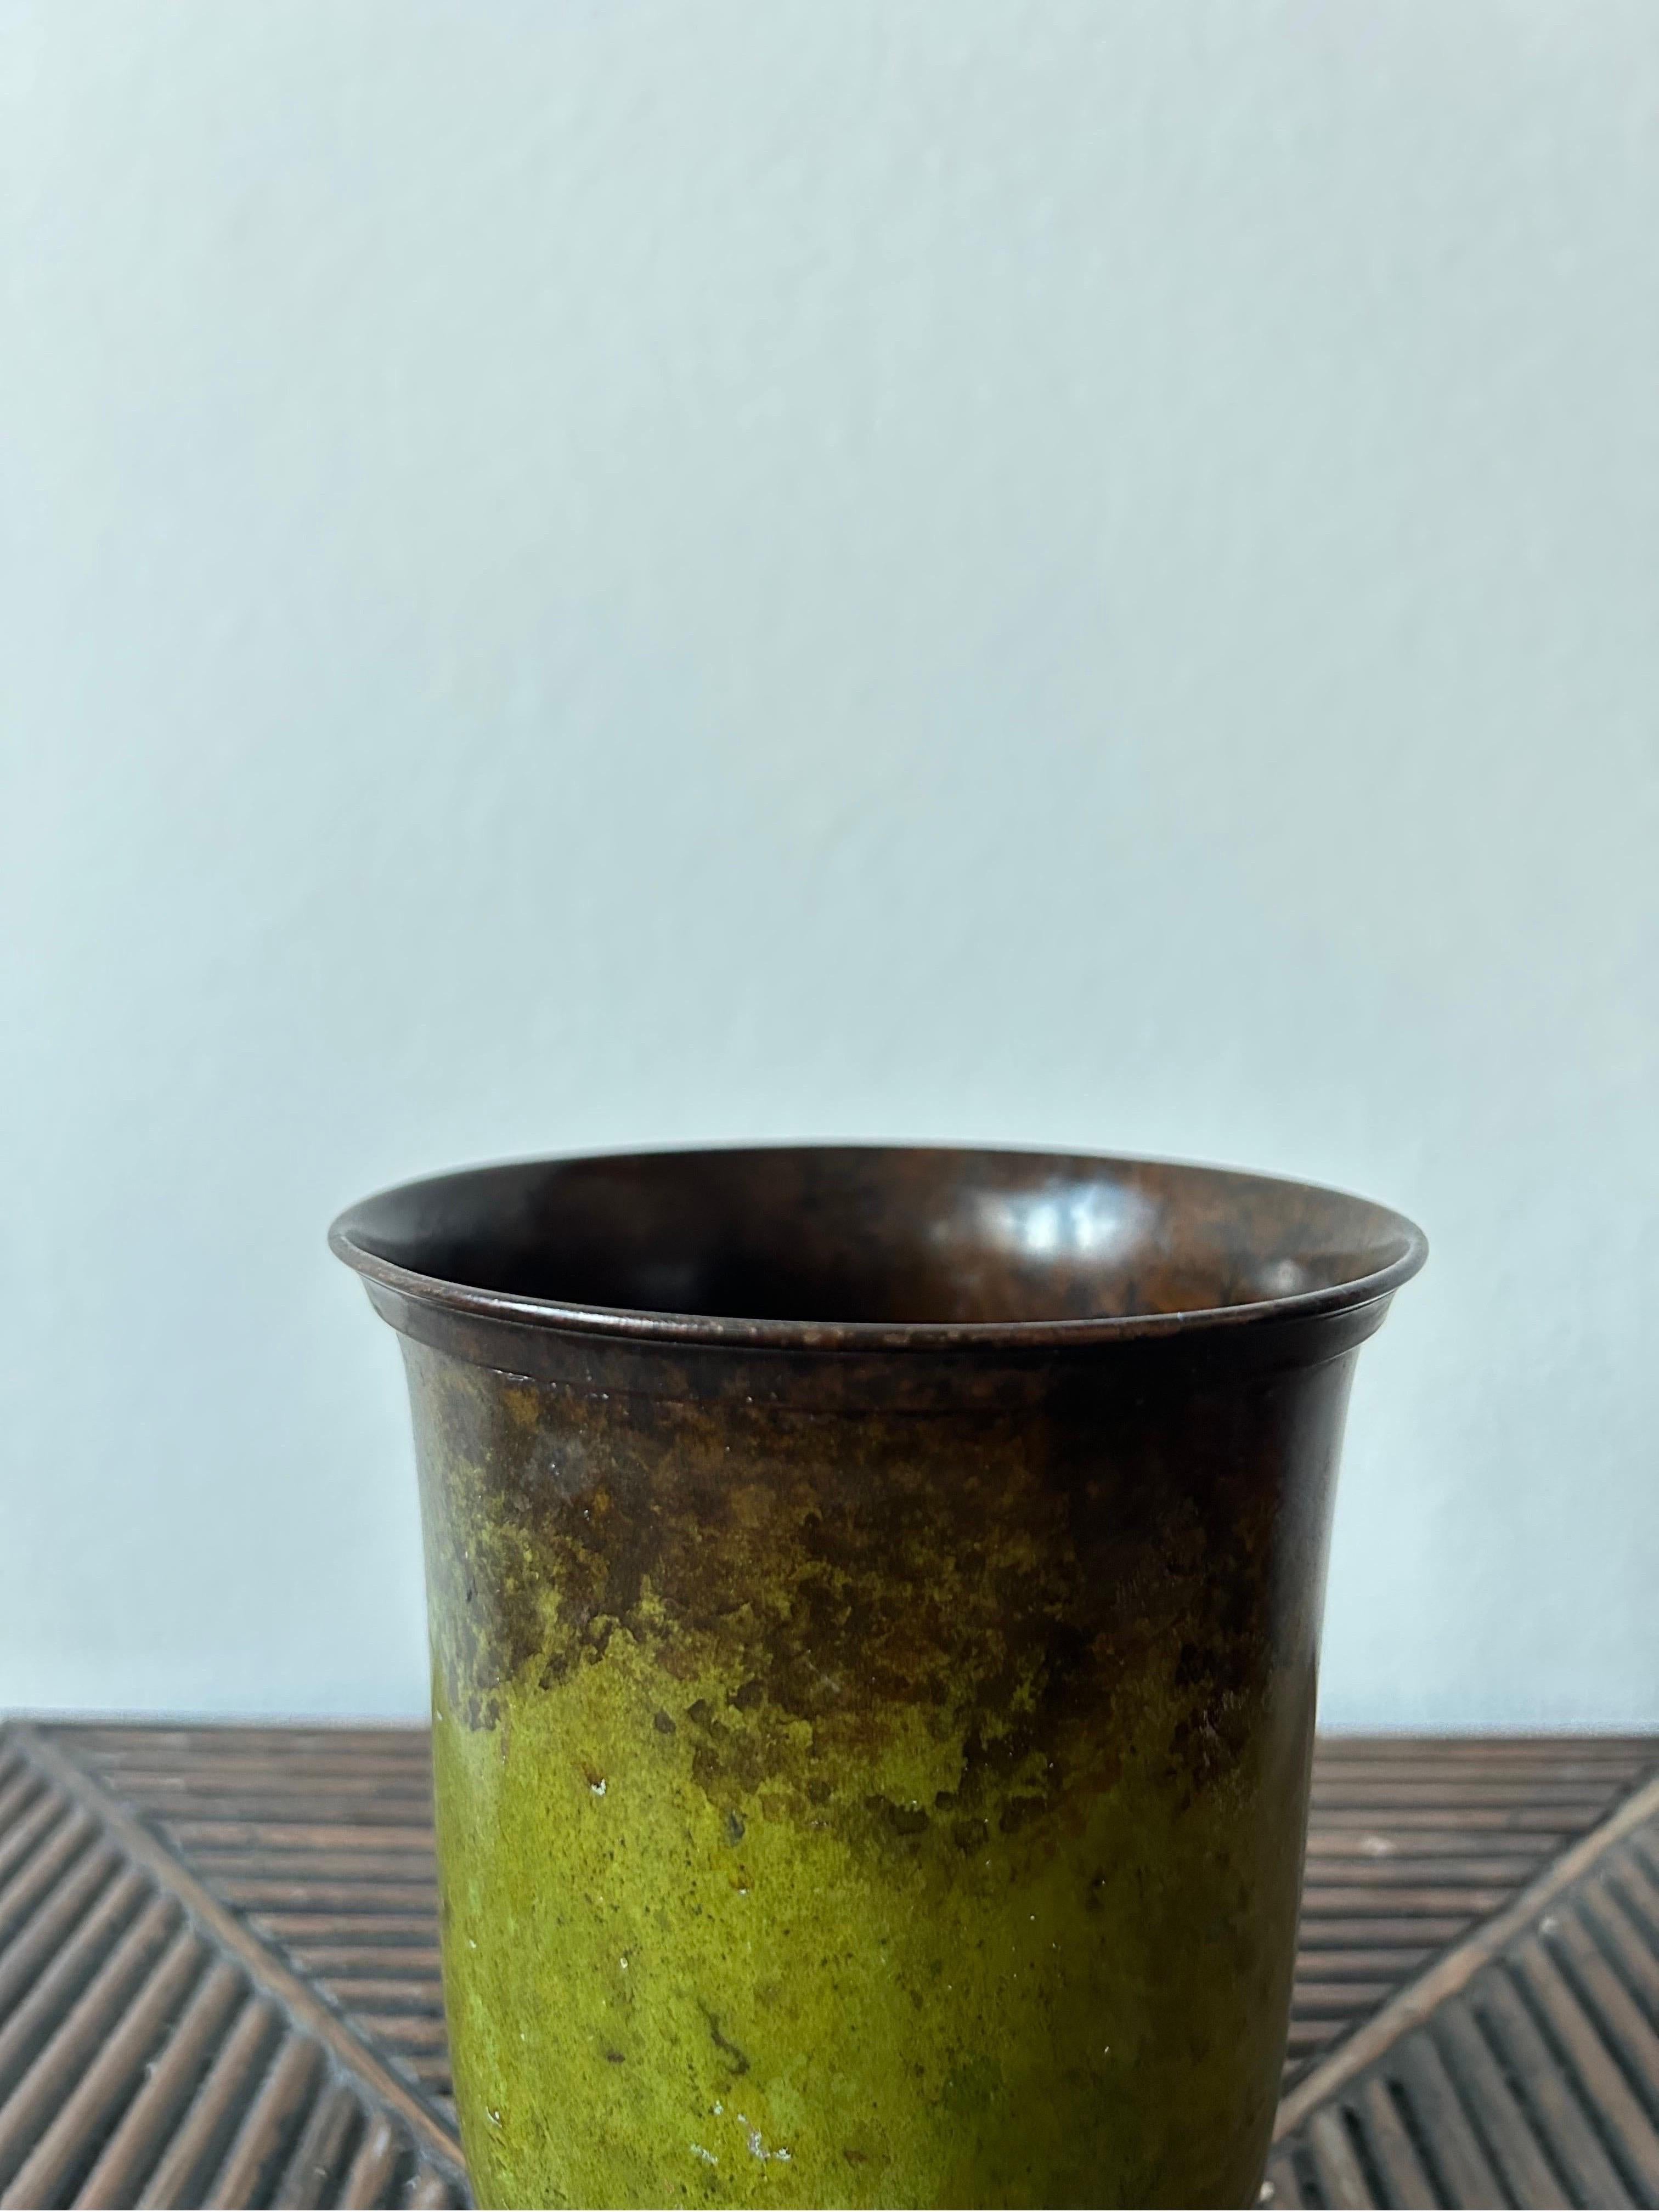 Rare Art Deco Bronze vase by Danish manufacturer HF Ildfast Bronze made in Denmark in the 1930’s, the vase carries the original patina which has been made in the 1930’s at the manufactures workshop and has only gotten more beautiful and charming